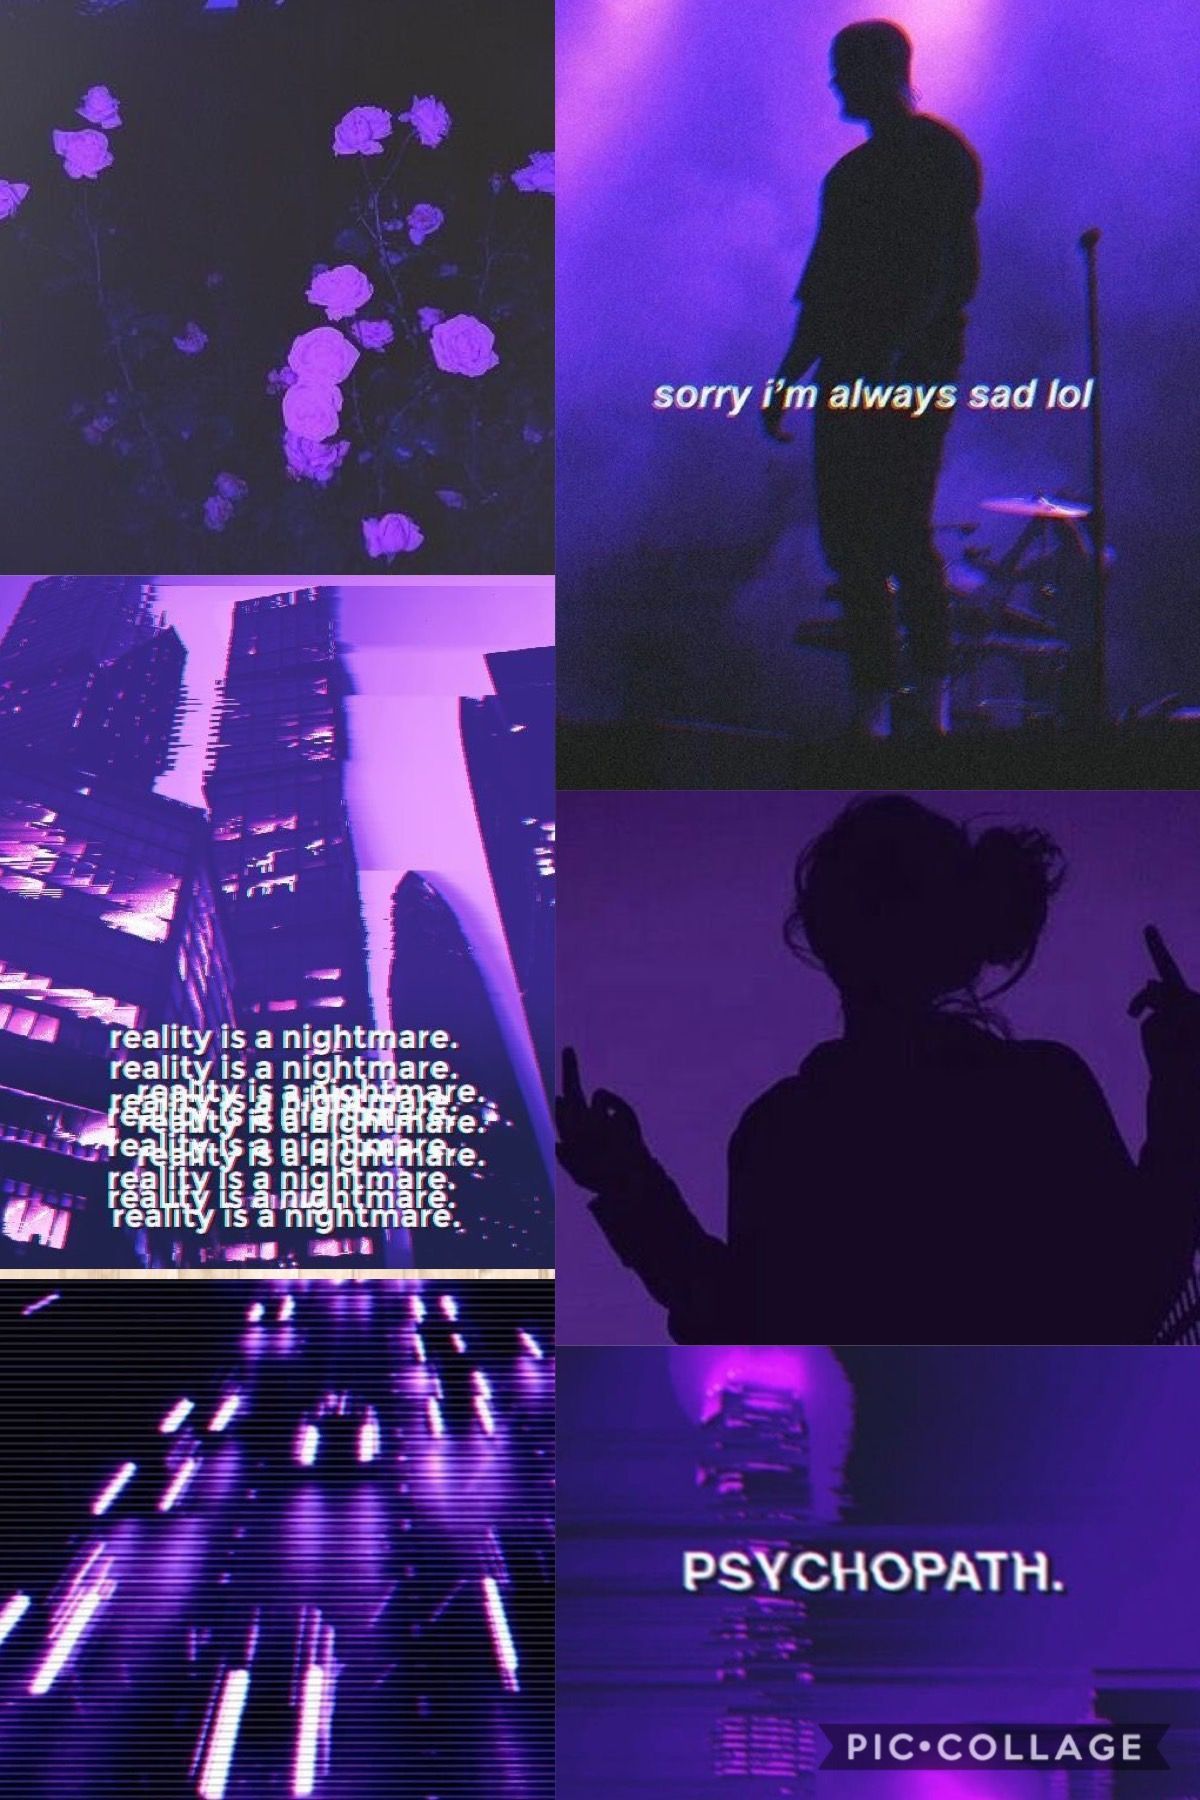 Purple aesthetic wallpaper. Purple aesthetic, Quotes about photography, Aesthetic wallpaper